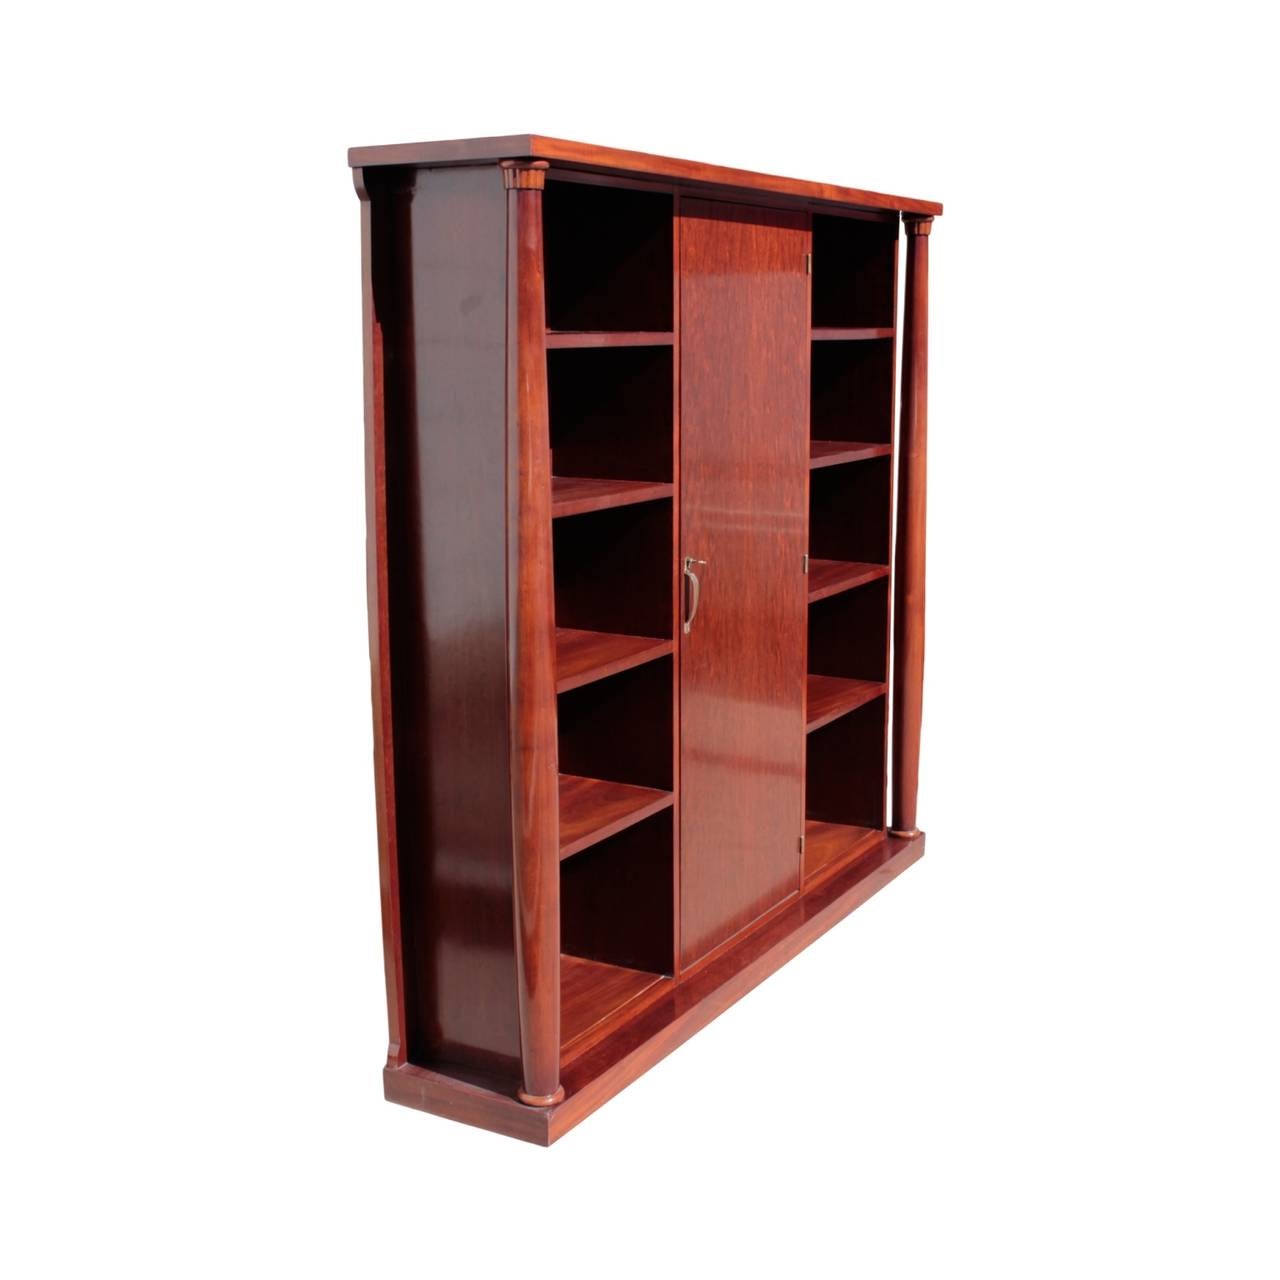 Exhibited French Art Deco Bookcase by Charlotte Chauchet-Guillere In Excellent Condition For Sale In Hudson, NY